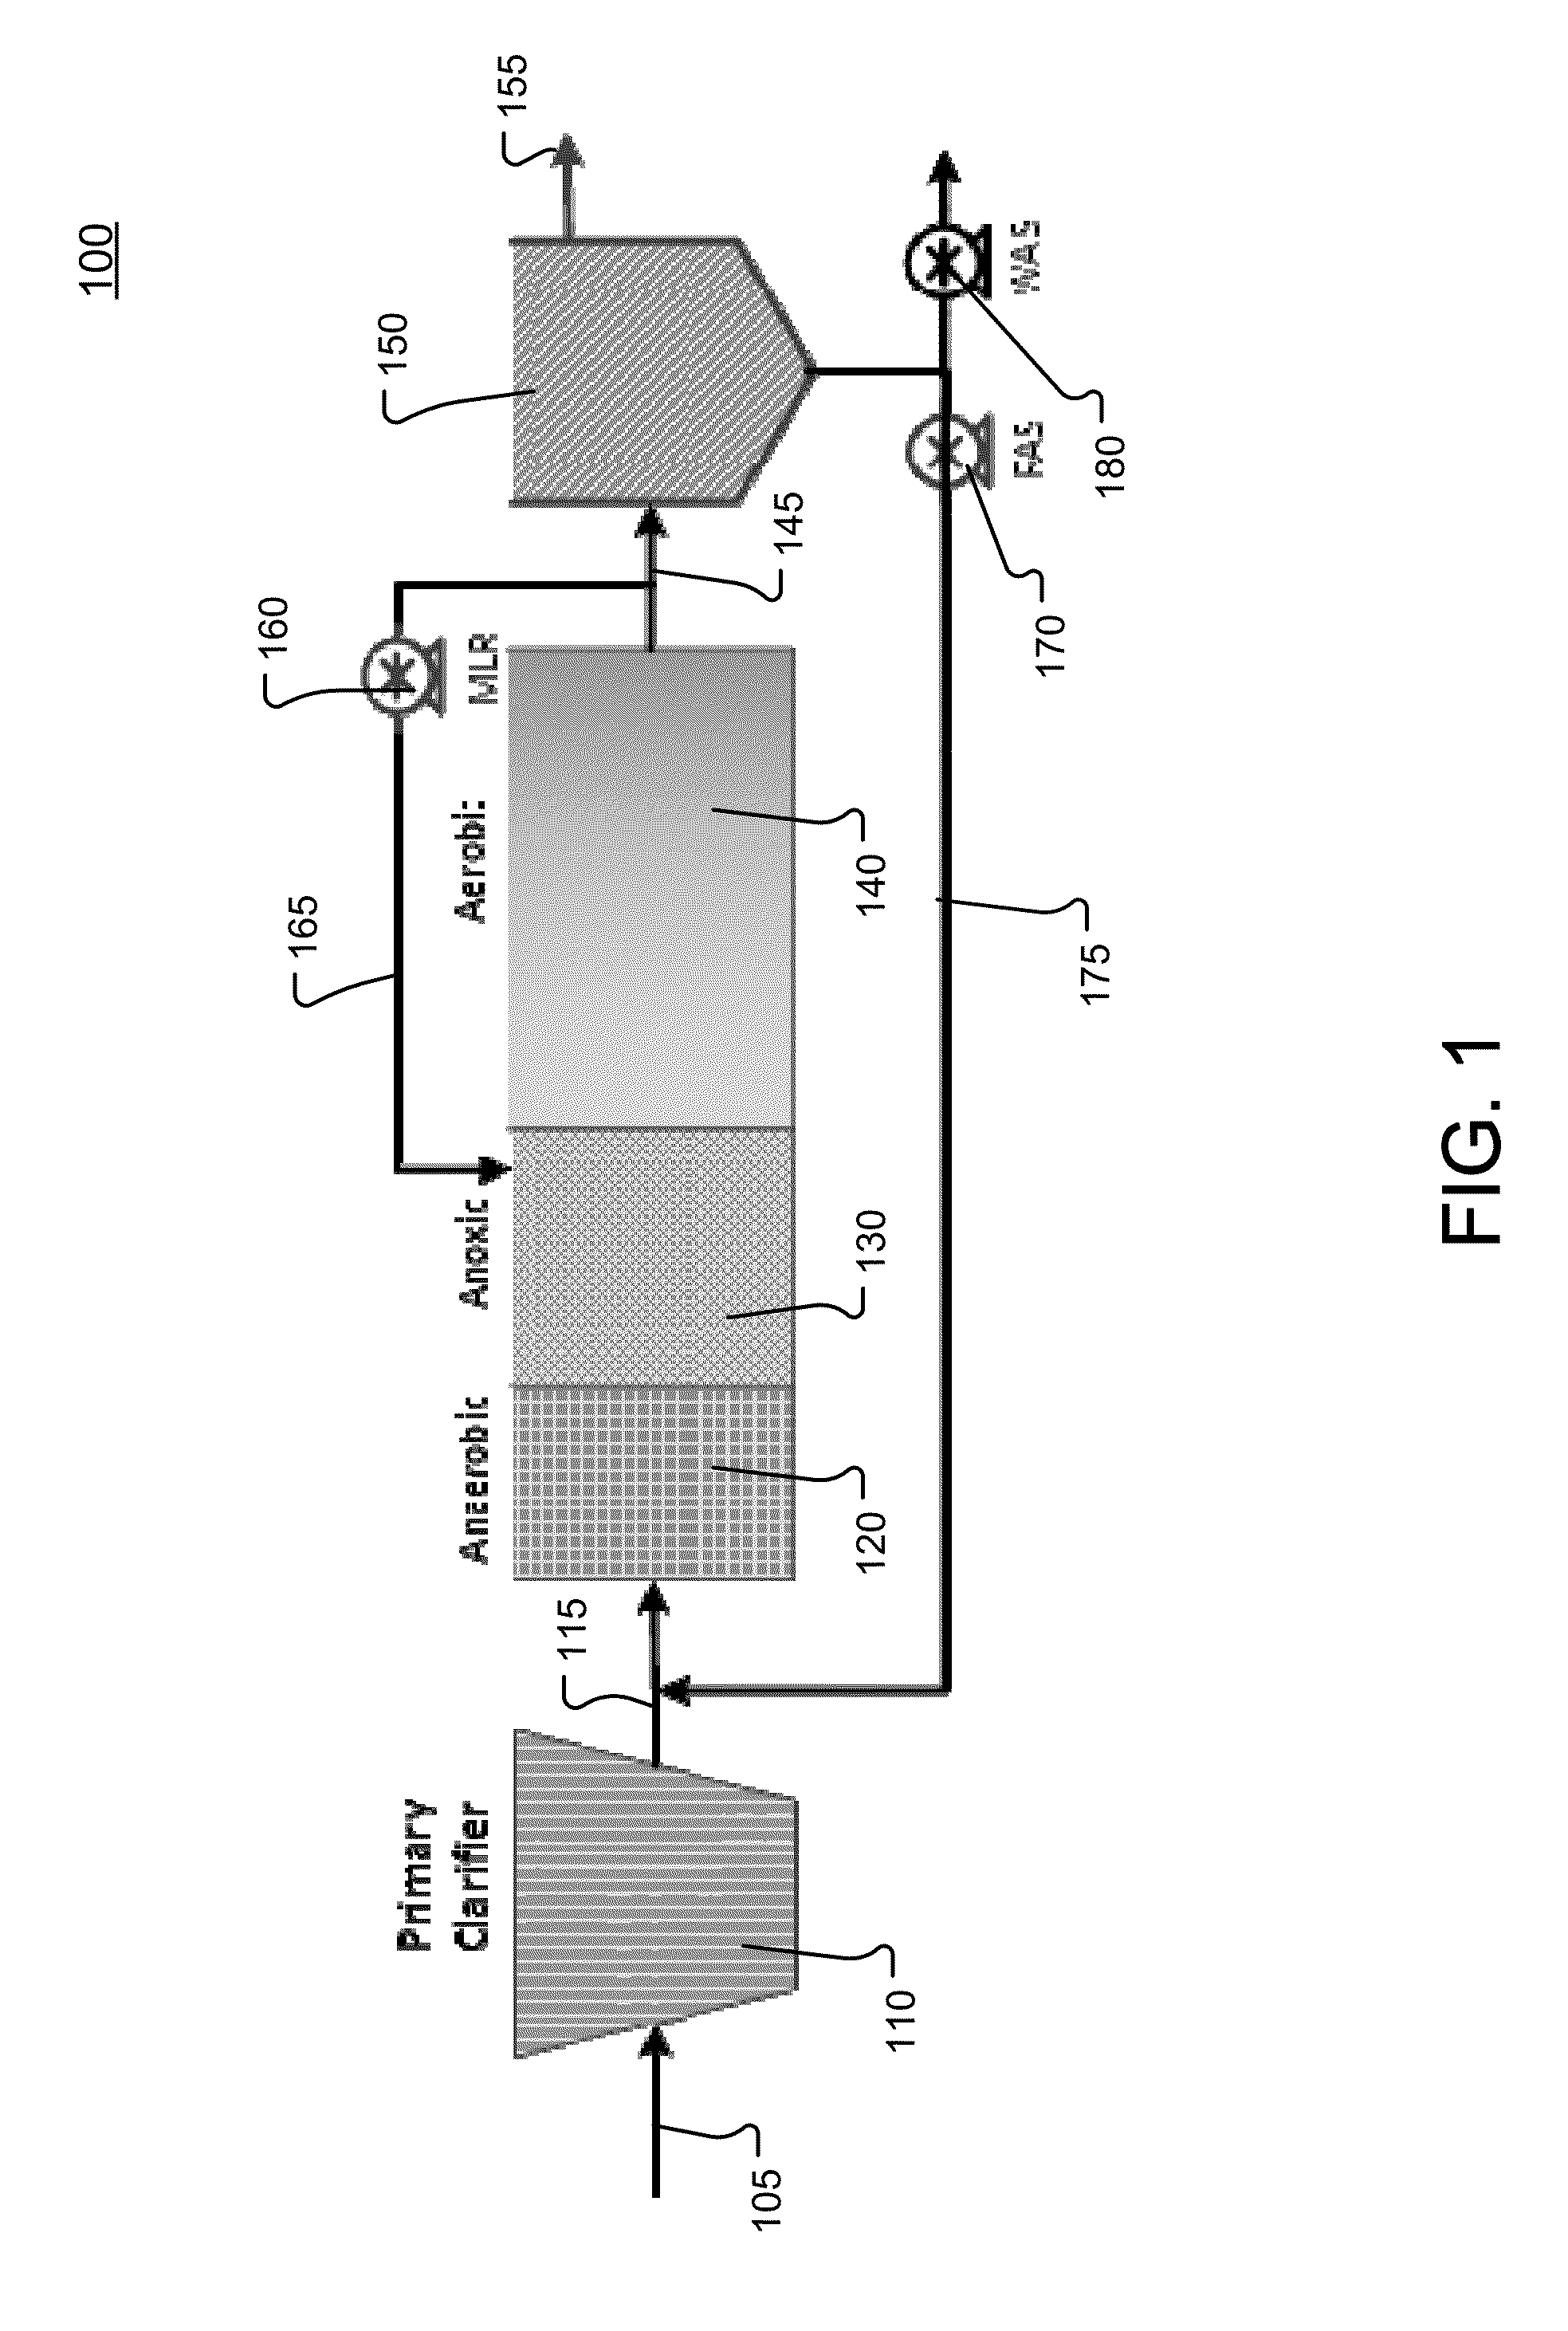 Method and apparatus for wastewater treatment using external selection